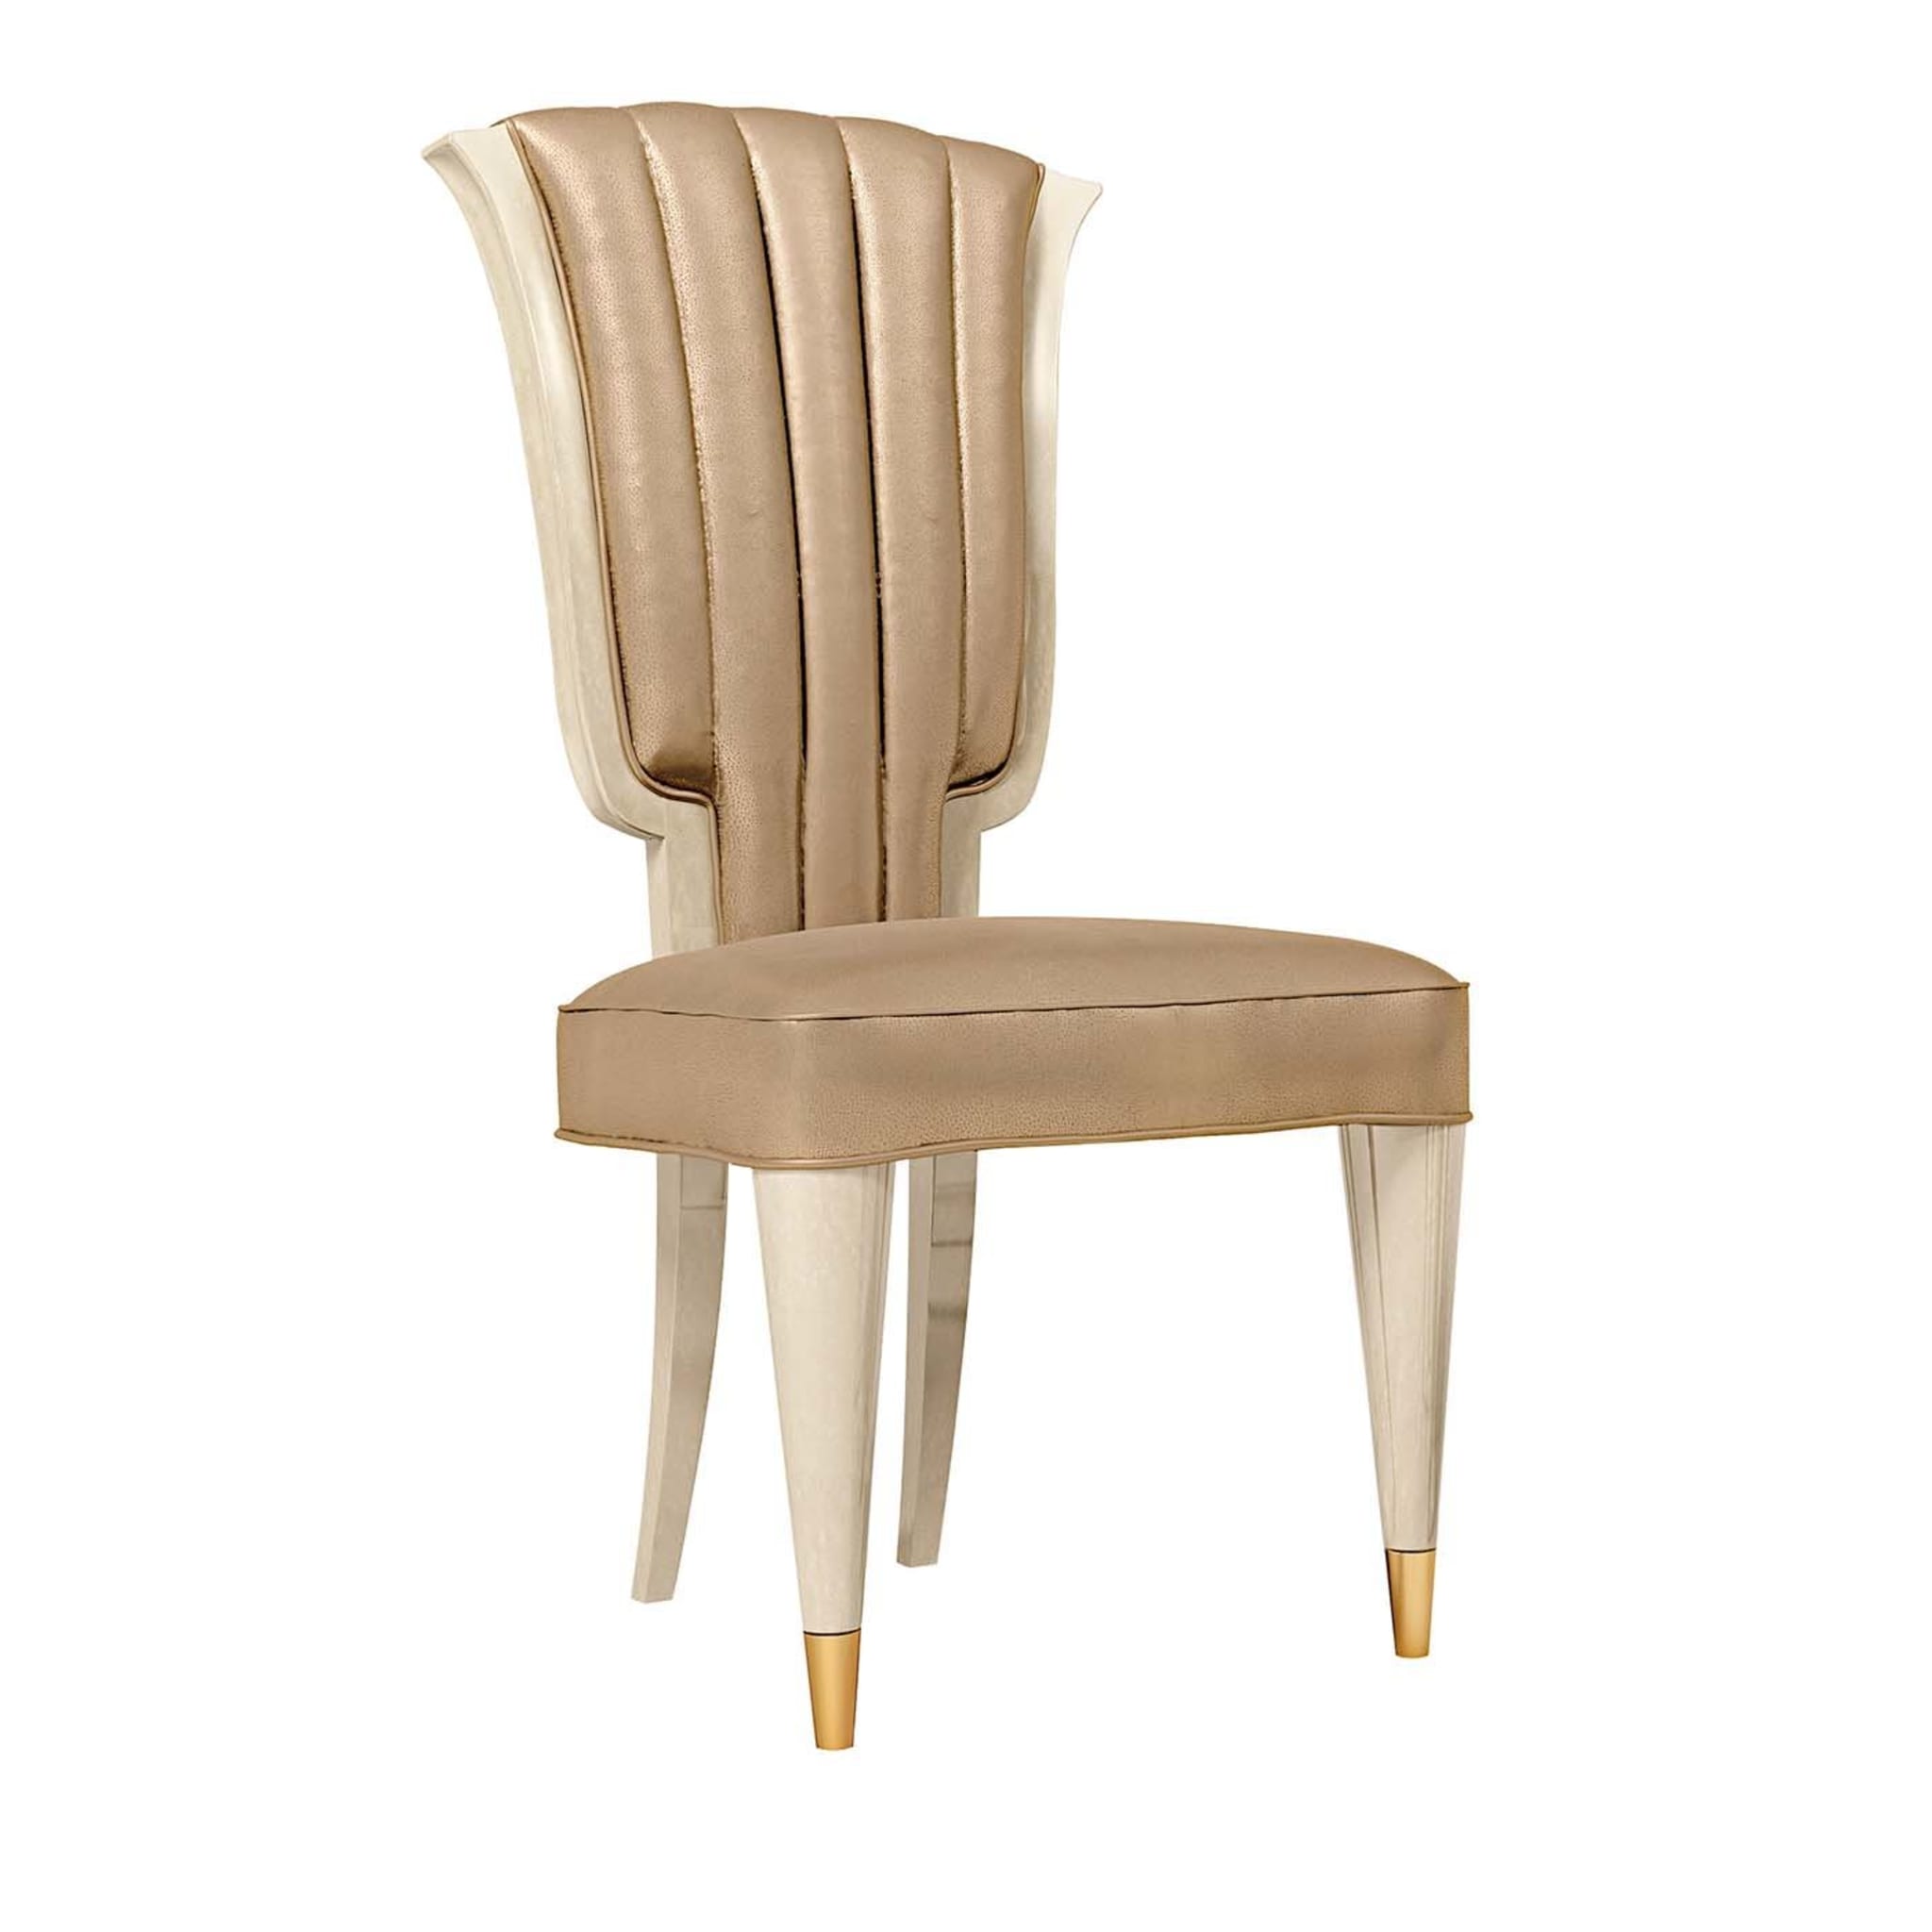 Trilogy Beige Dining Chair - Main view